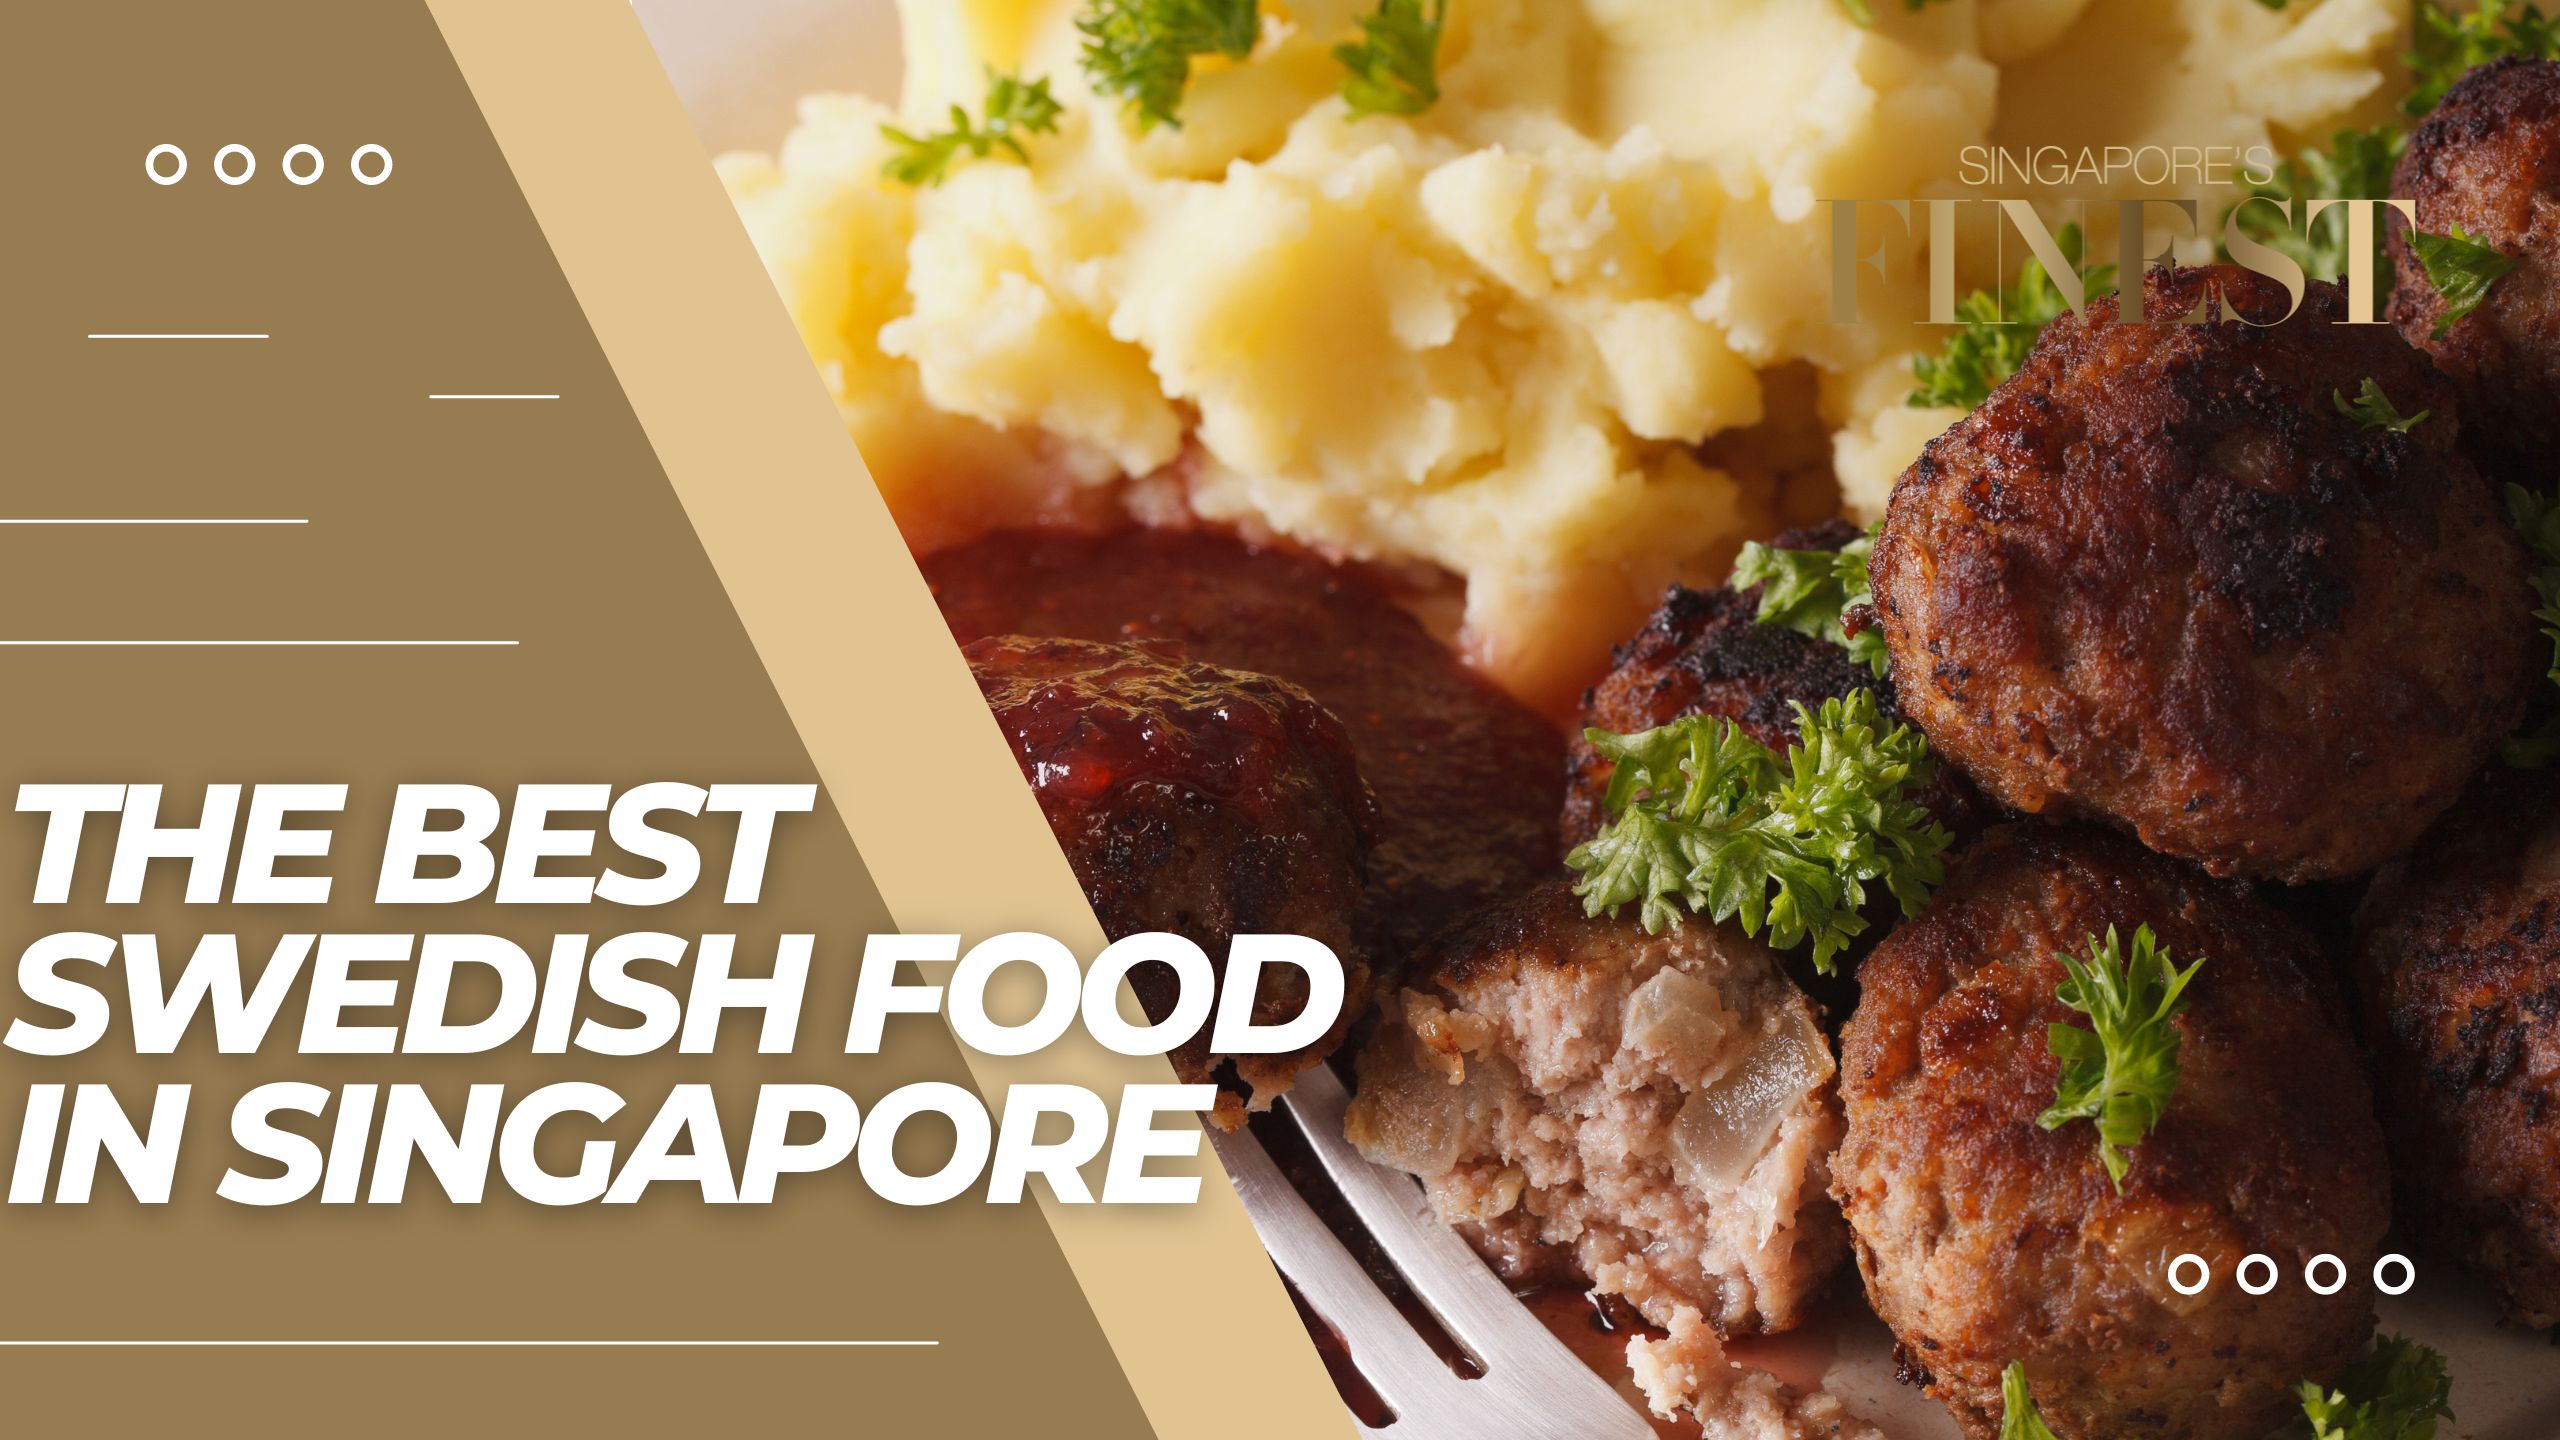 The Finest Swedish Food in Singapore